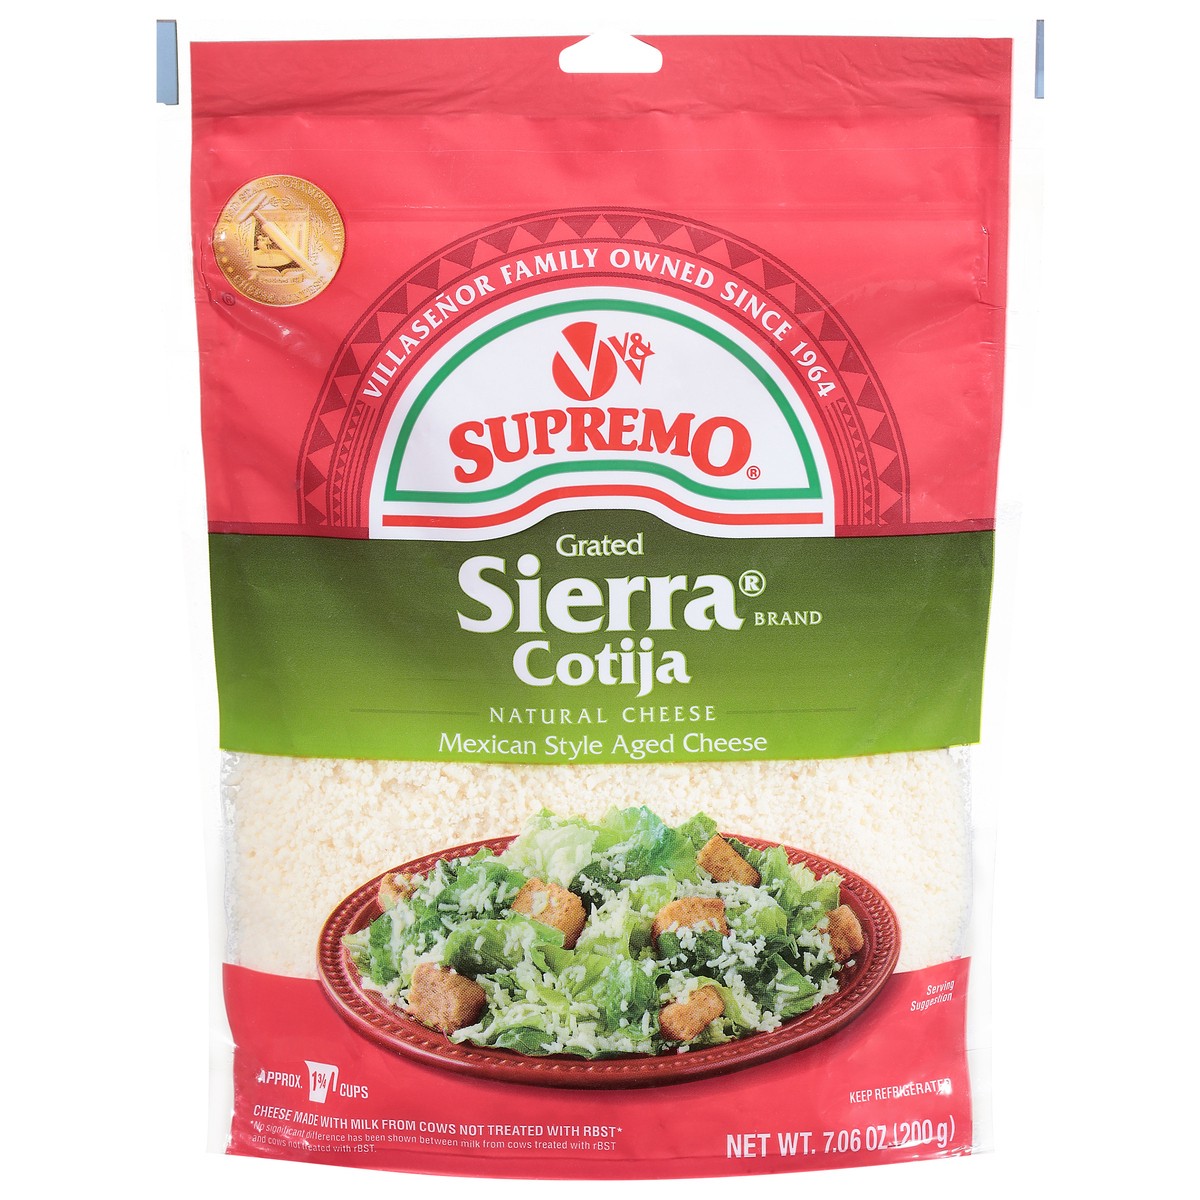 slide 11 of 14, Supremo Natural Sierra Brand Cotija Grated Cheese 7.06 oz, 1 ct